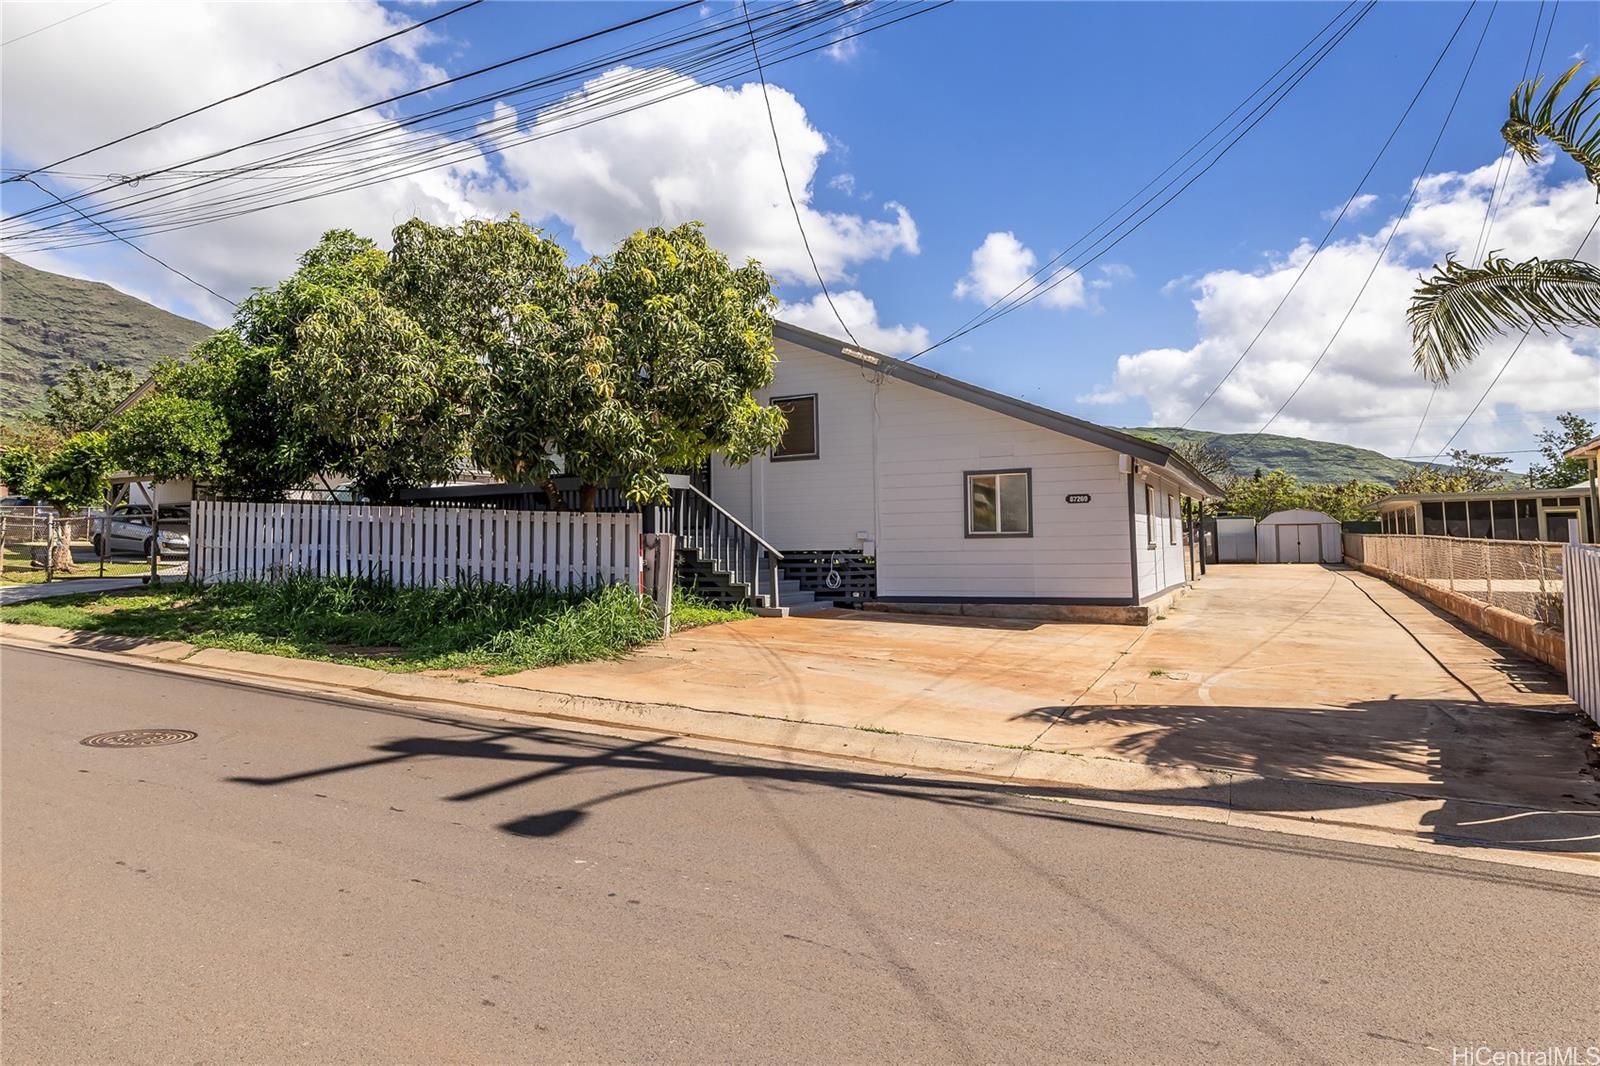 87-269 Auyong Homestead Road, Waianae, Hawaii, 96792, United States, 6 Bedrooms Bedrooms, ,3 BathroomsBathrooms,Residential,For Sale,87-269 auyong homestead RD,1475572